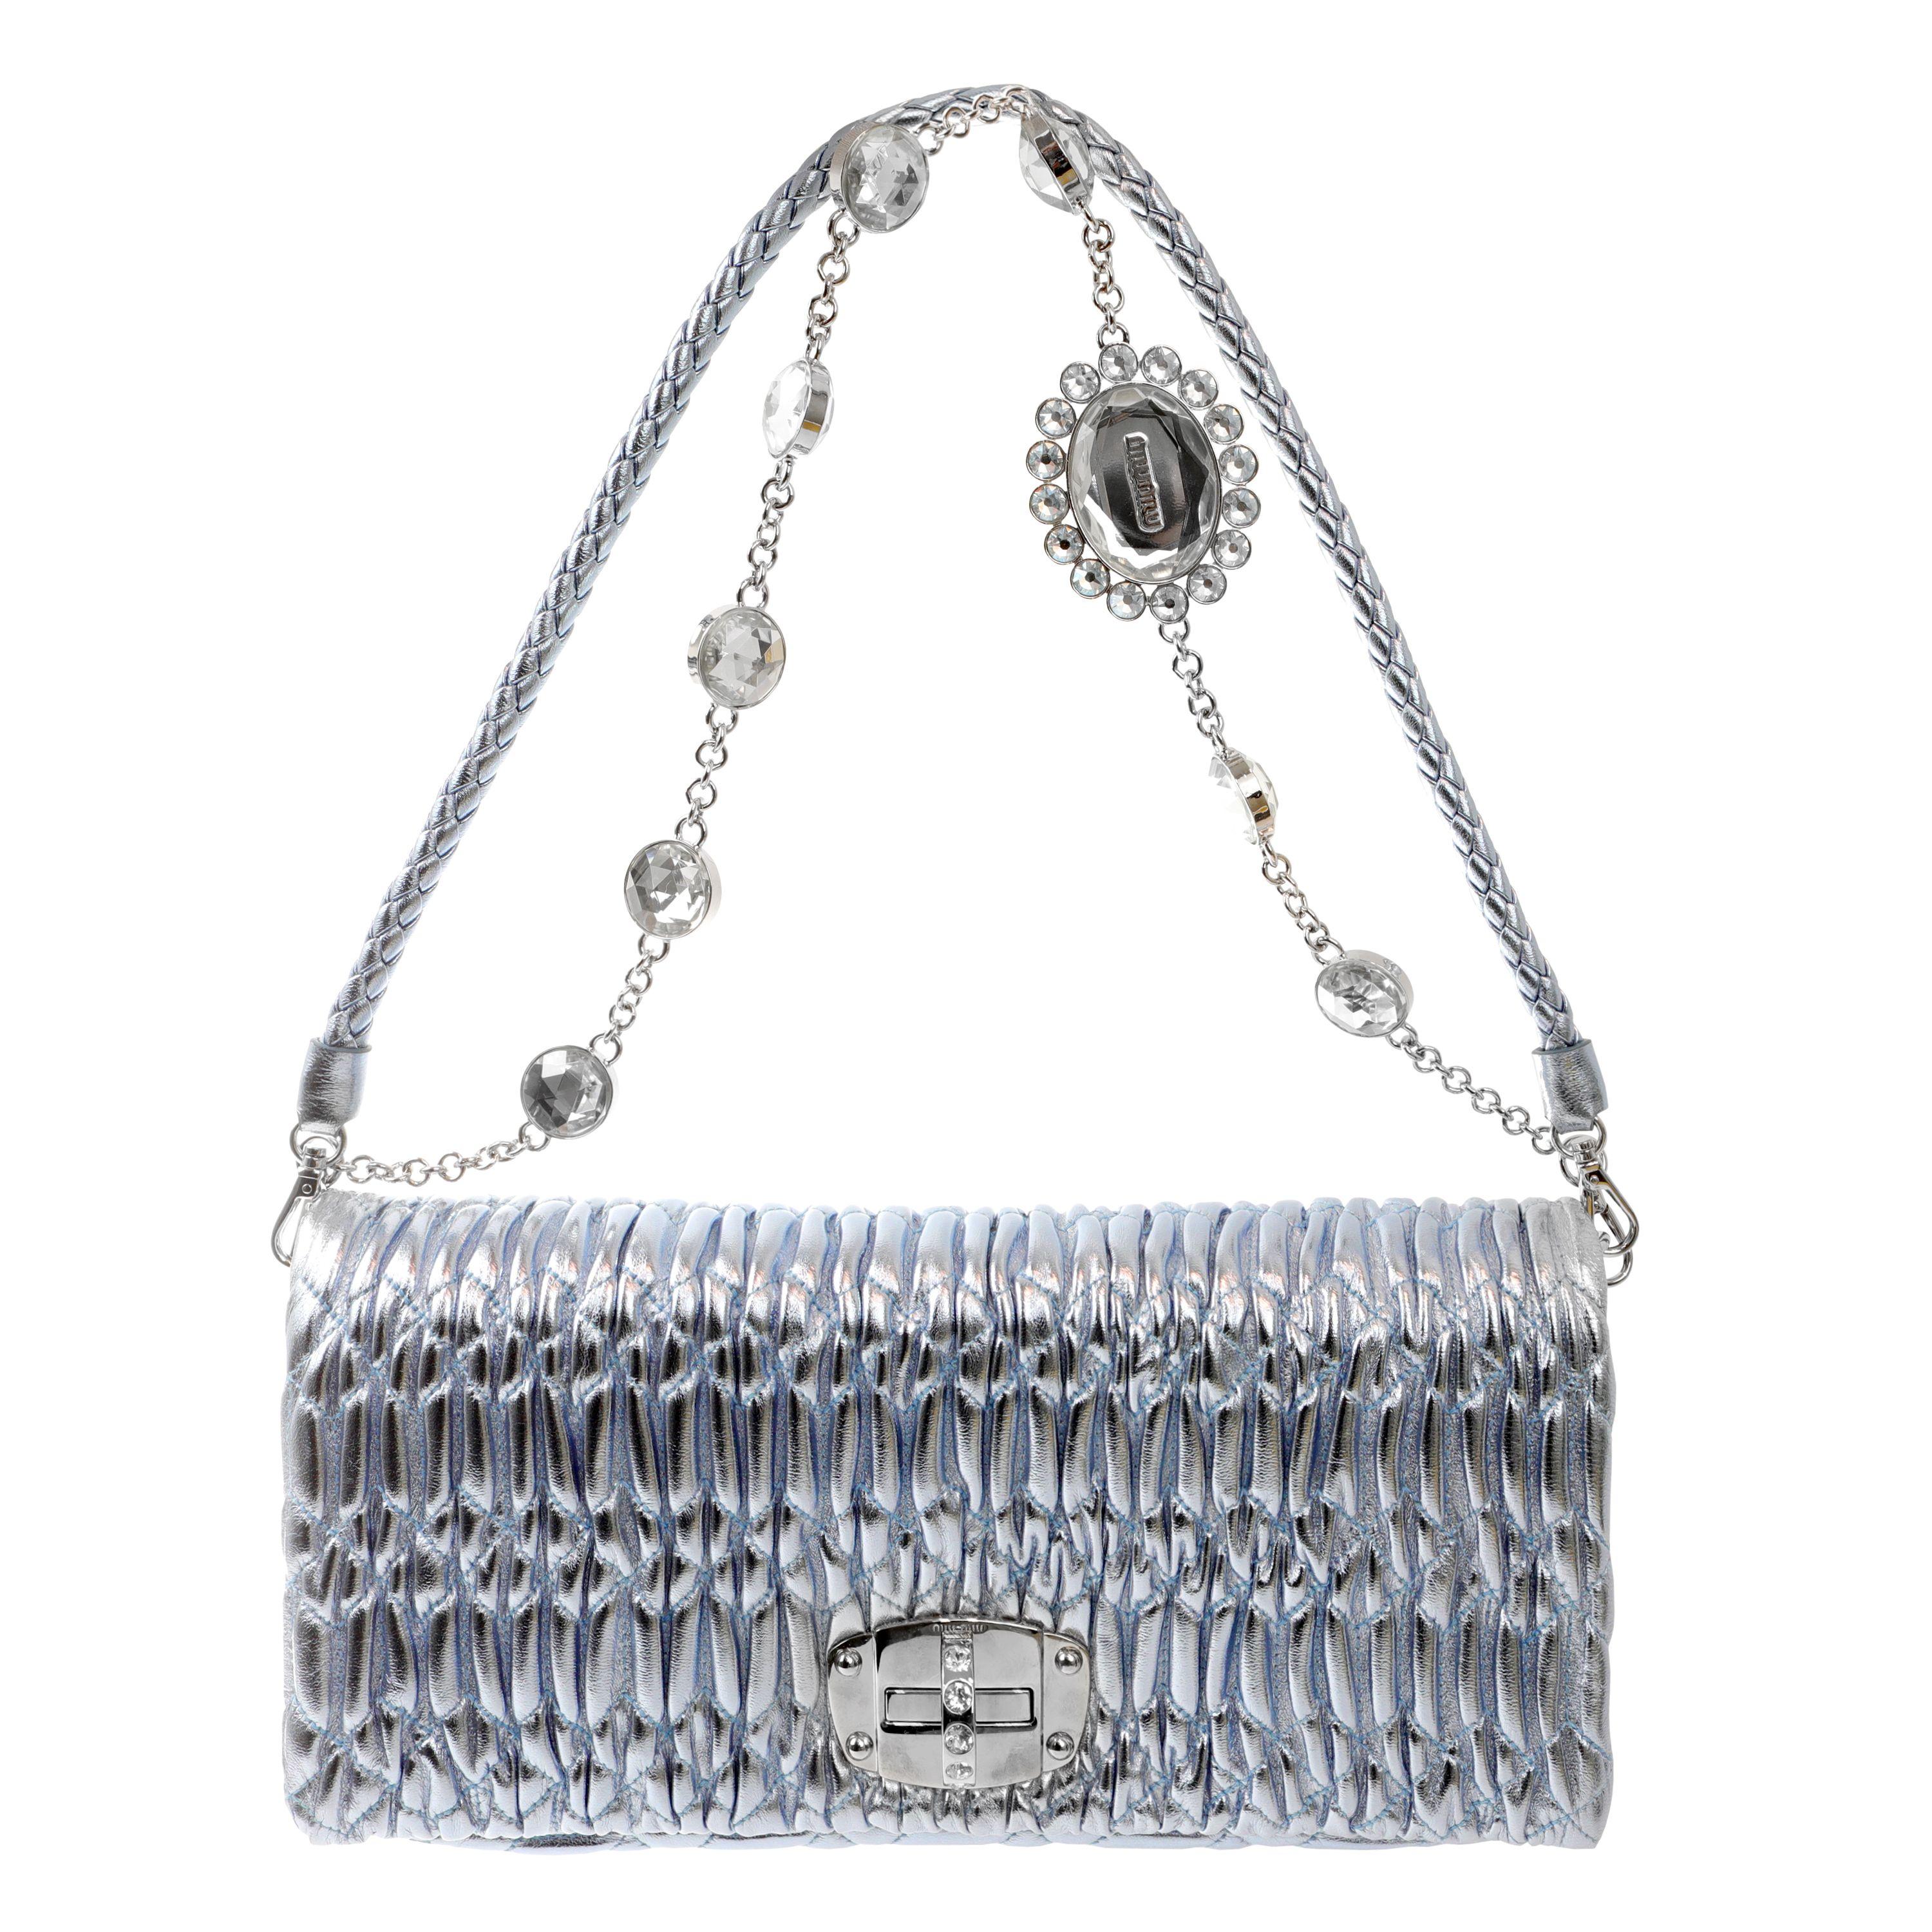 Miu Miu Metallic Blue Crystal Iconic Cloquè Small Bag with Silver Hardware In Excellent Condition For Sale In Palm Beach, FL